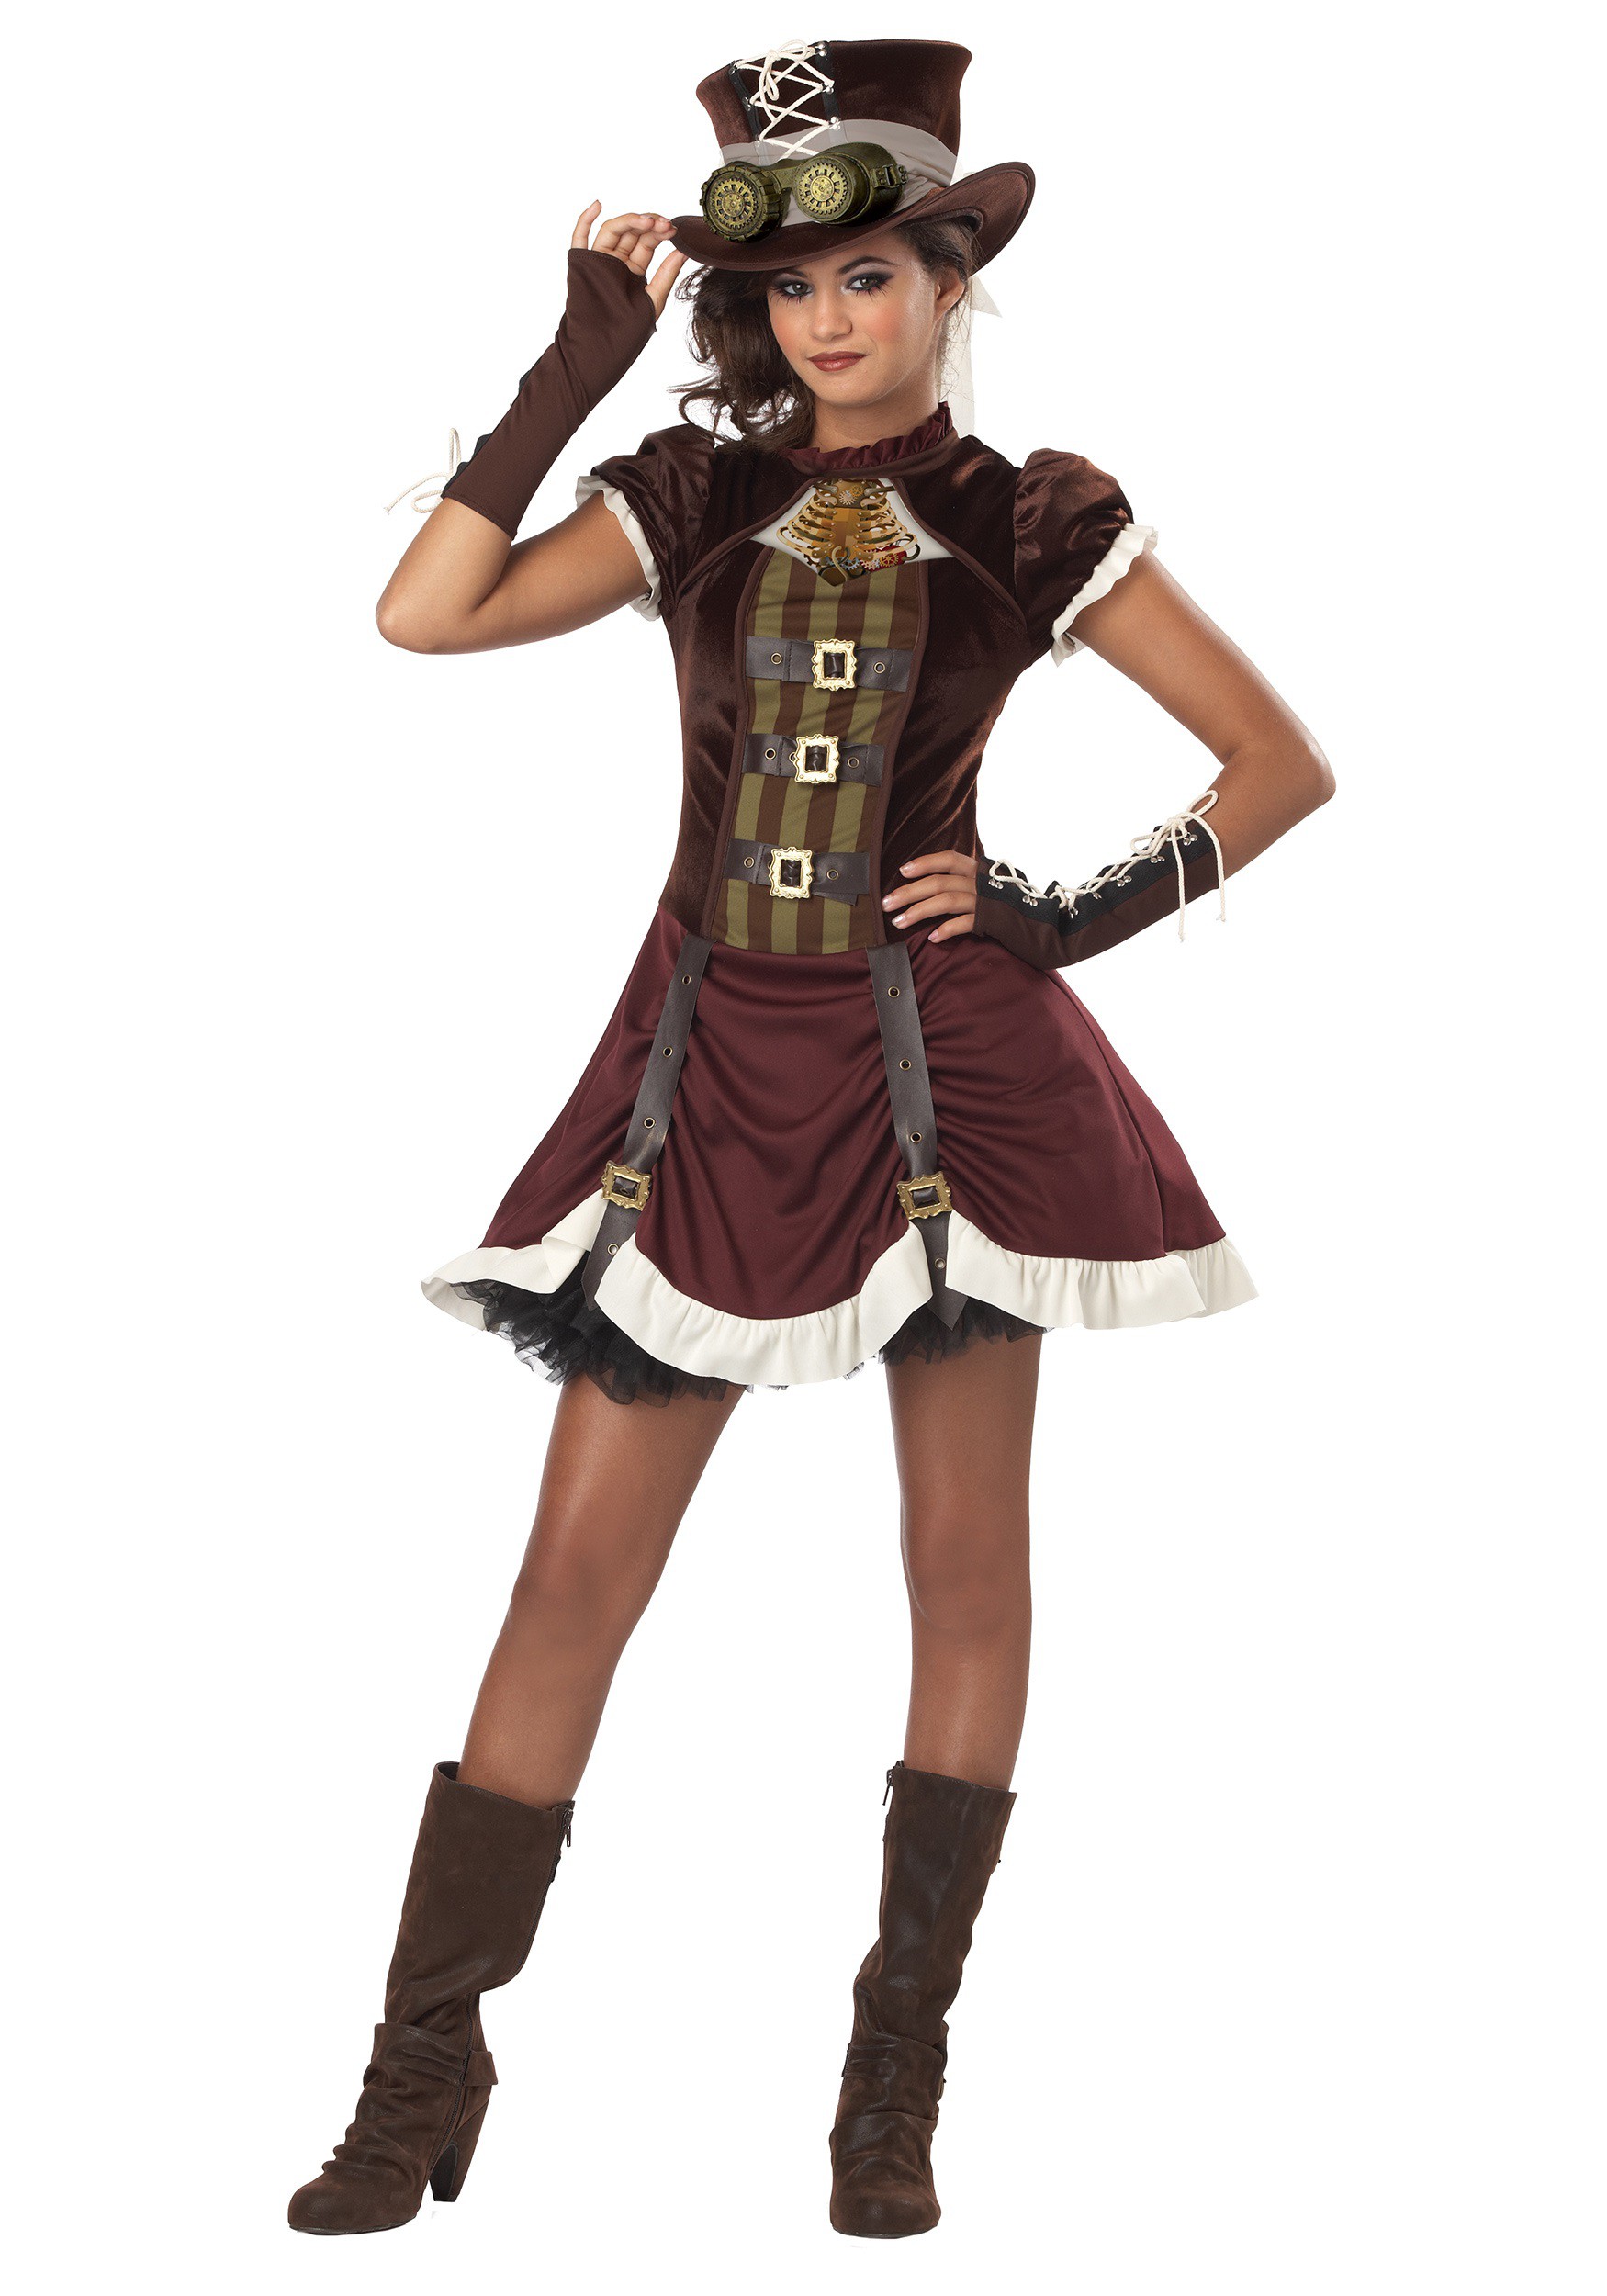 Photos - Fancy Dress California Costume Collection Steampunk Girl Costume for Tweens | Unique H 